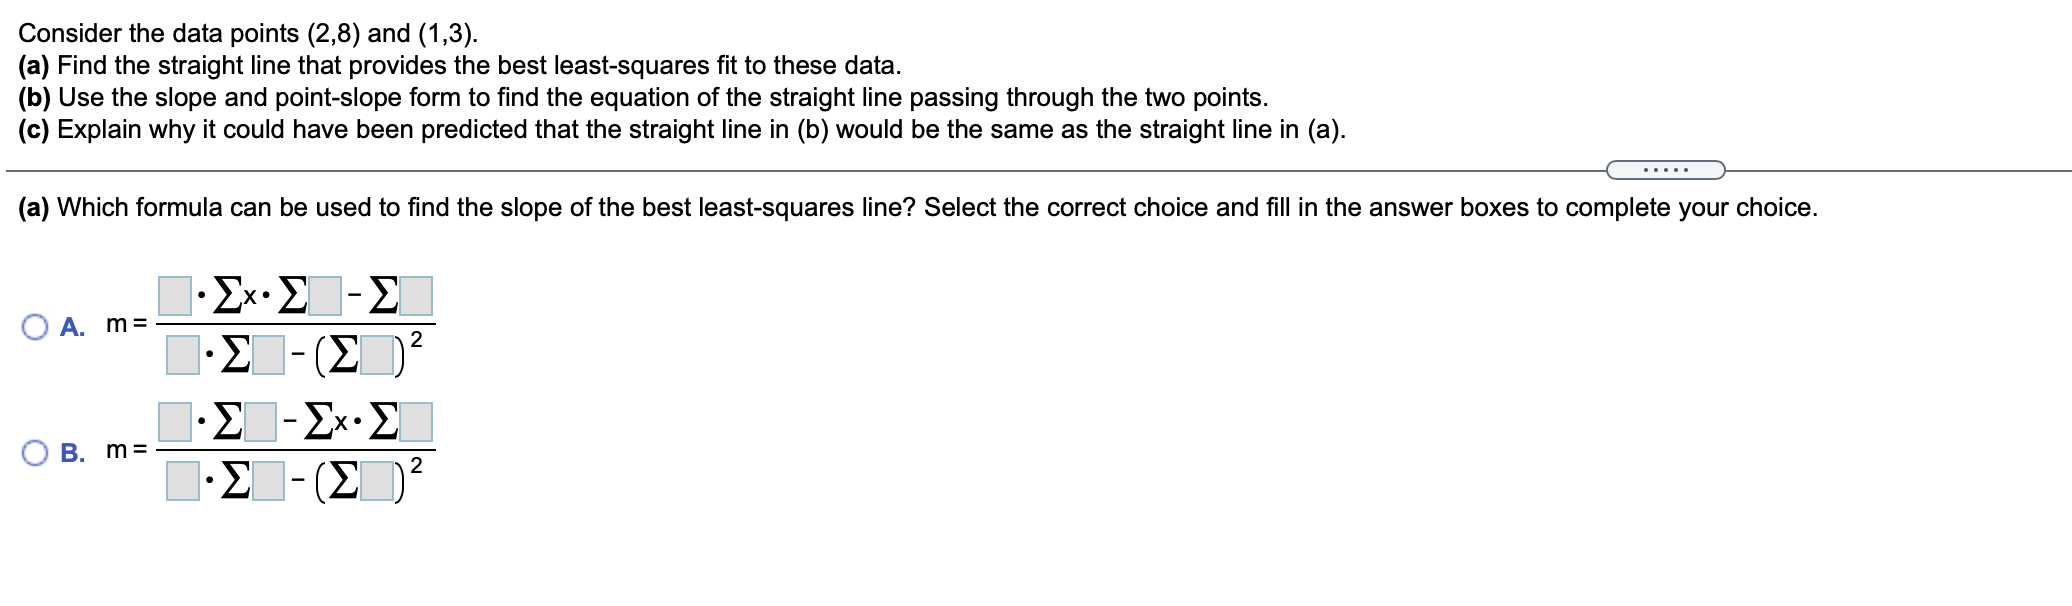 Consider The Data Points 2 8 And 1 3 A Find The Straight Line That Provides The Best Least Squares Fit To These D 1